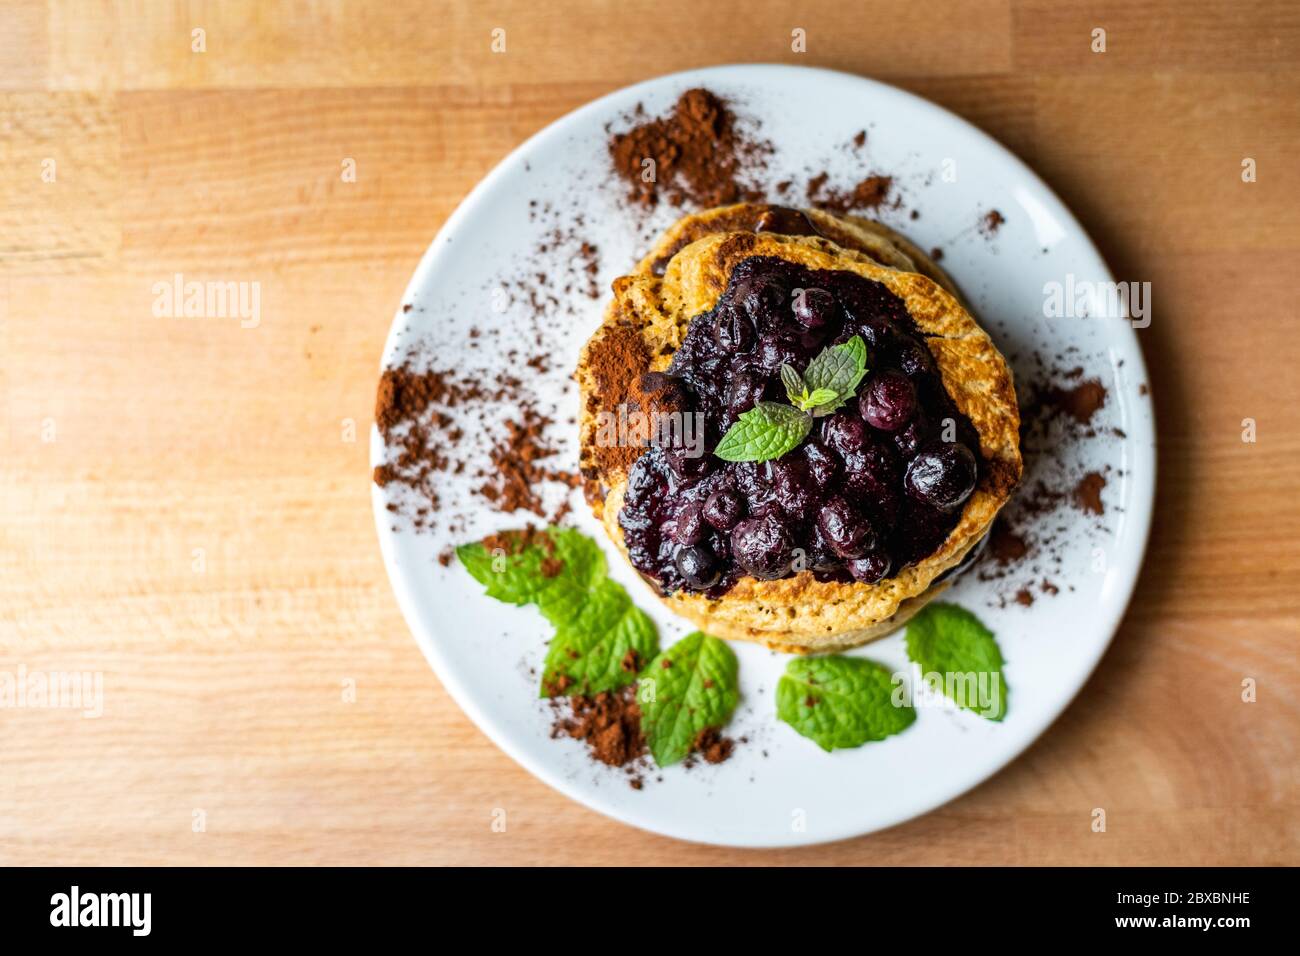 Delicious oats American pancakes with homemade chocolate toping, cooked blueberries and fresh mint leafs. Healthy lifestyle cooking Stock Photo